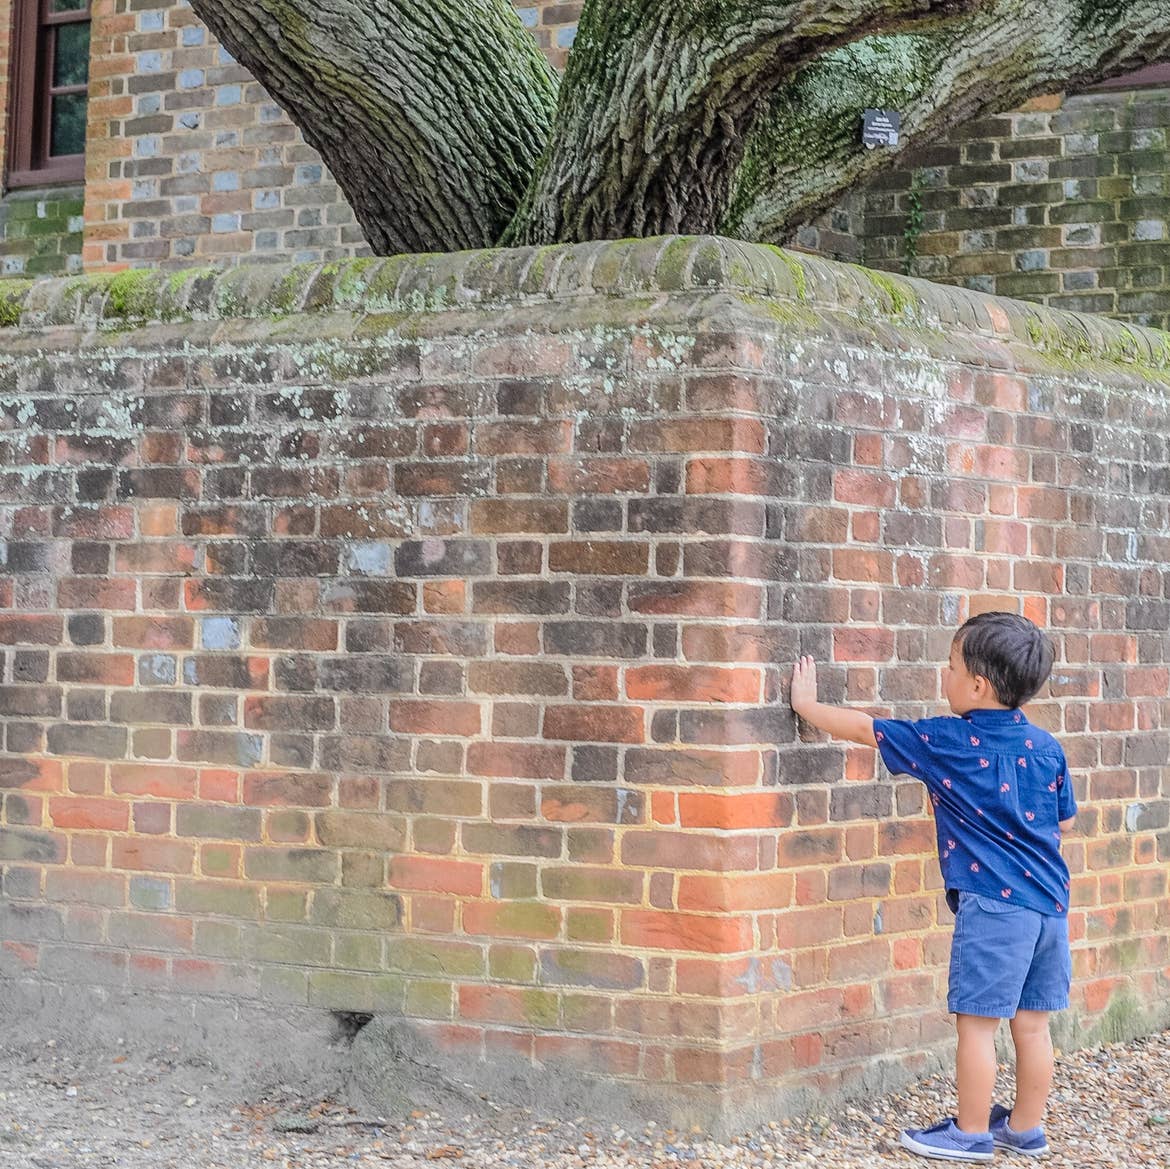 Angelica's son putting his hand on a historic wall in Williamsburg, Virginia.